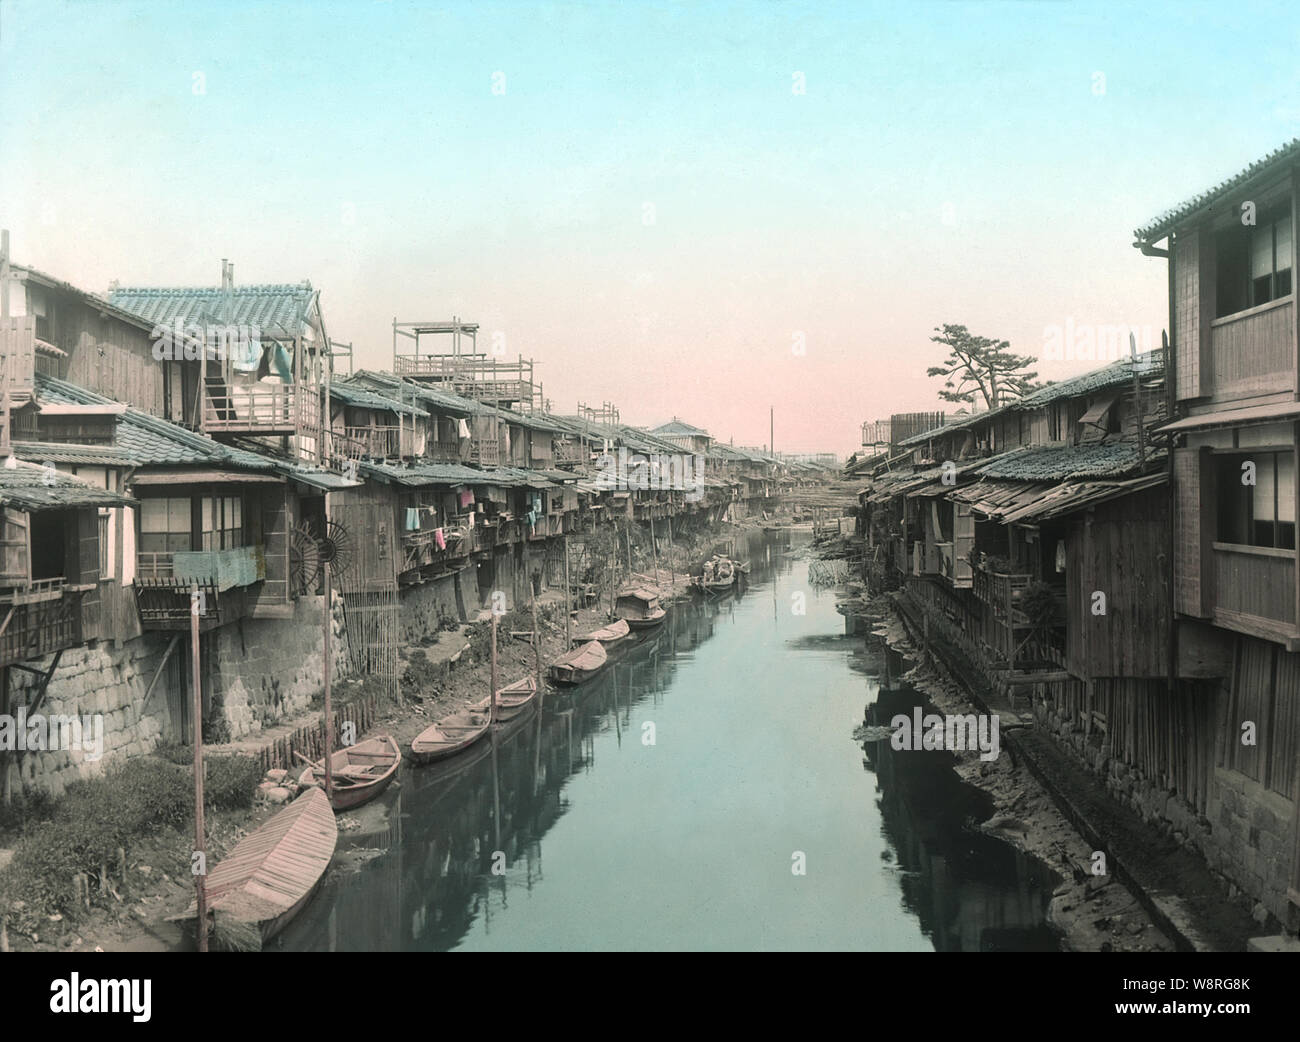 [ 1890s Japan - Canal in Osaka ] —   Kurayashiki and teahouses on the Shijimigawa River in Osaka’s Kitashinchi. Several boats can be seen. A Kurayashiki is a house built like a warehouse. Boats with geisha entertaining guests could be seen here in the evening, laughter and shamisen music drifting into the air.   19th century vintage albumen photograph. Stock Photo